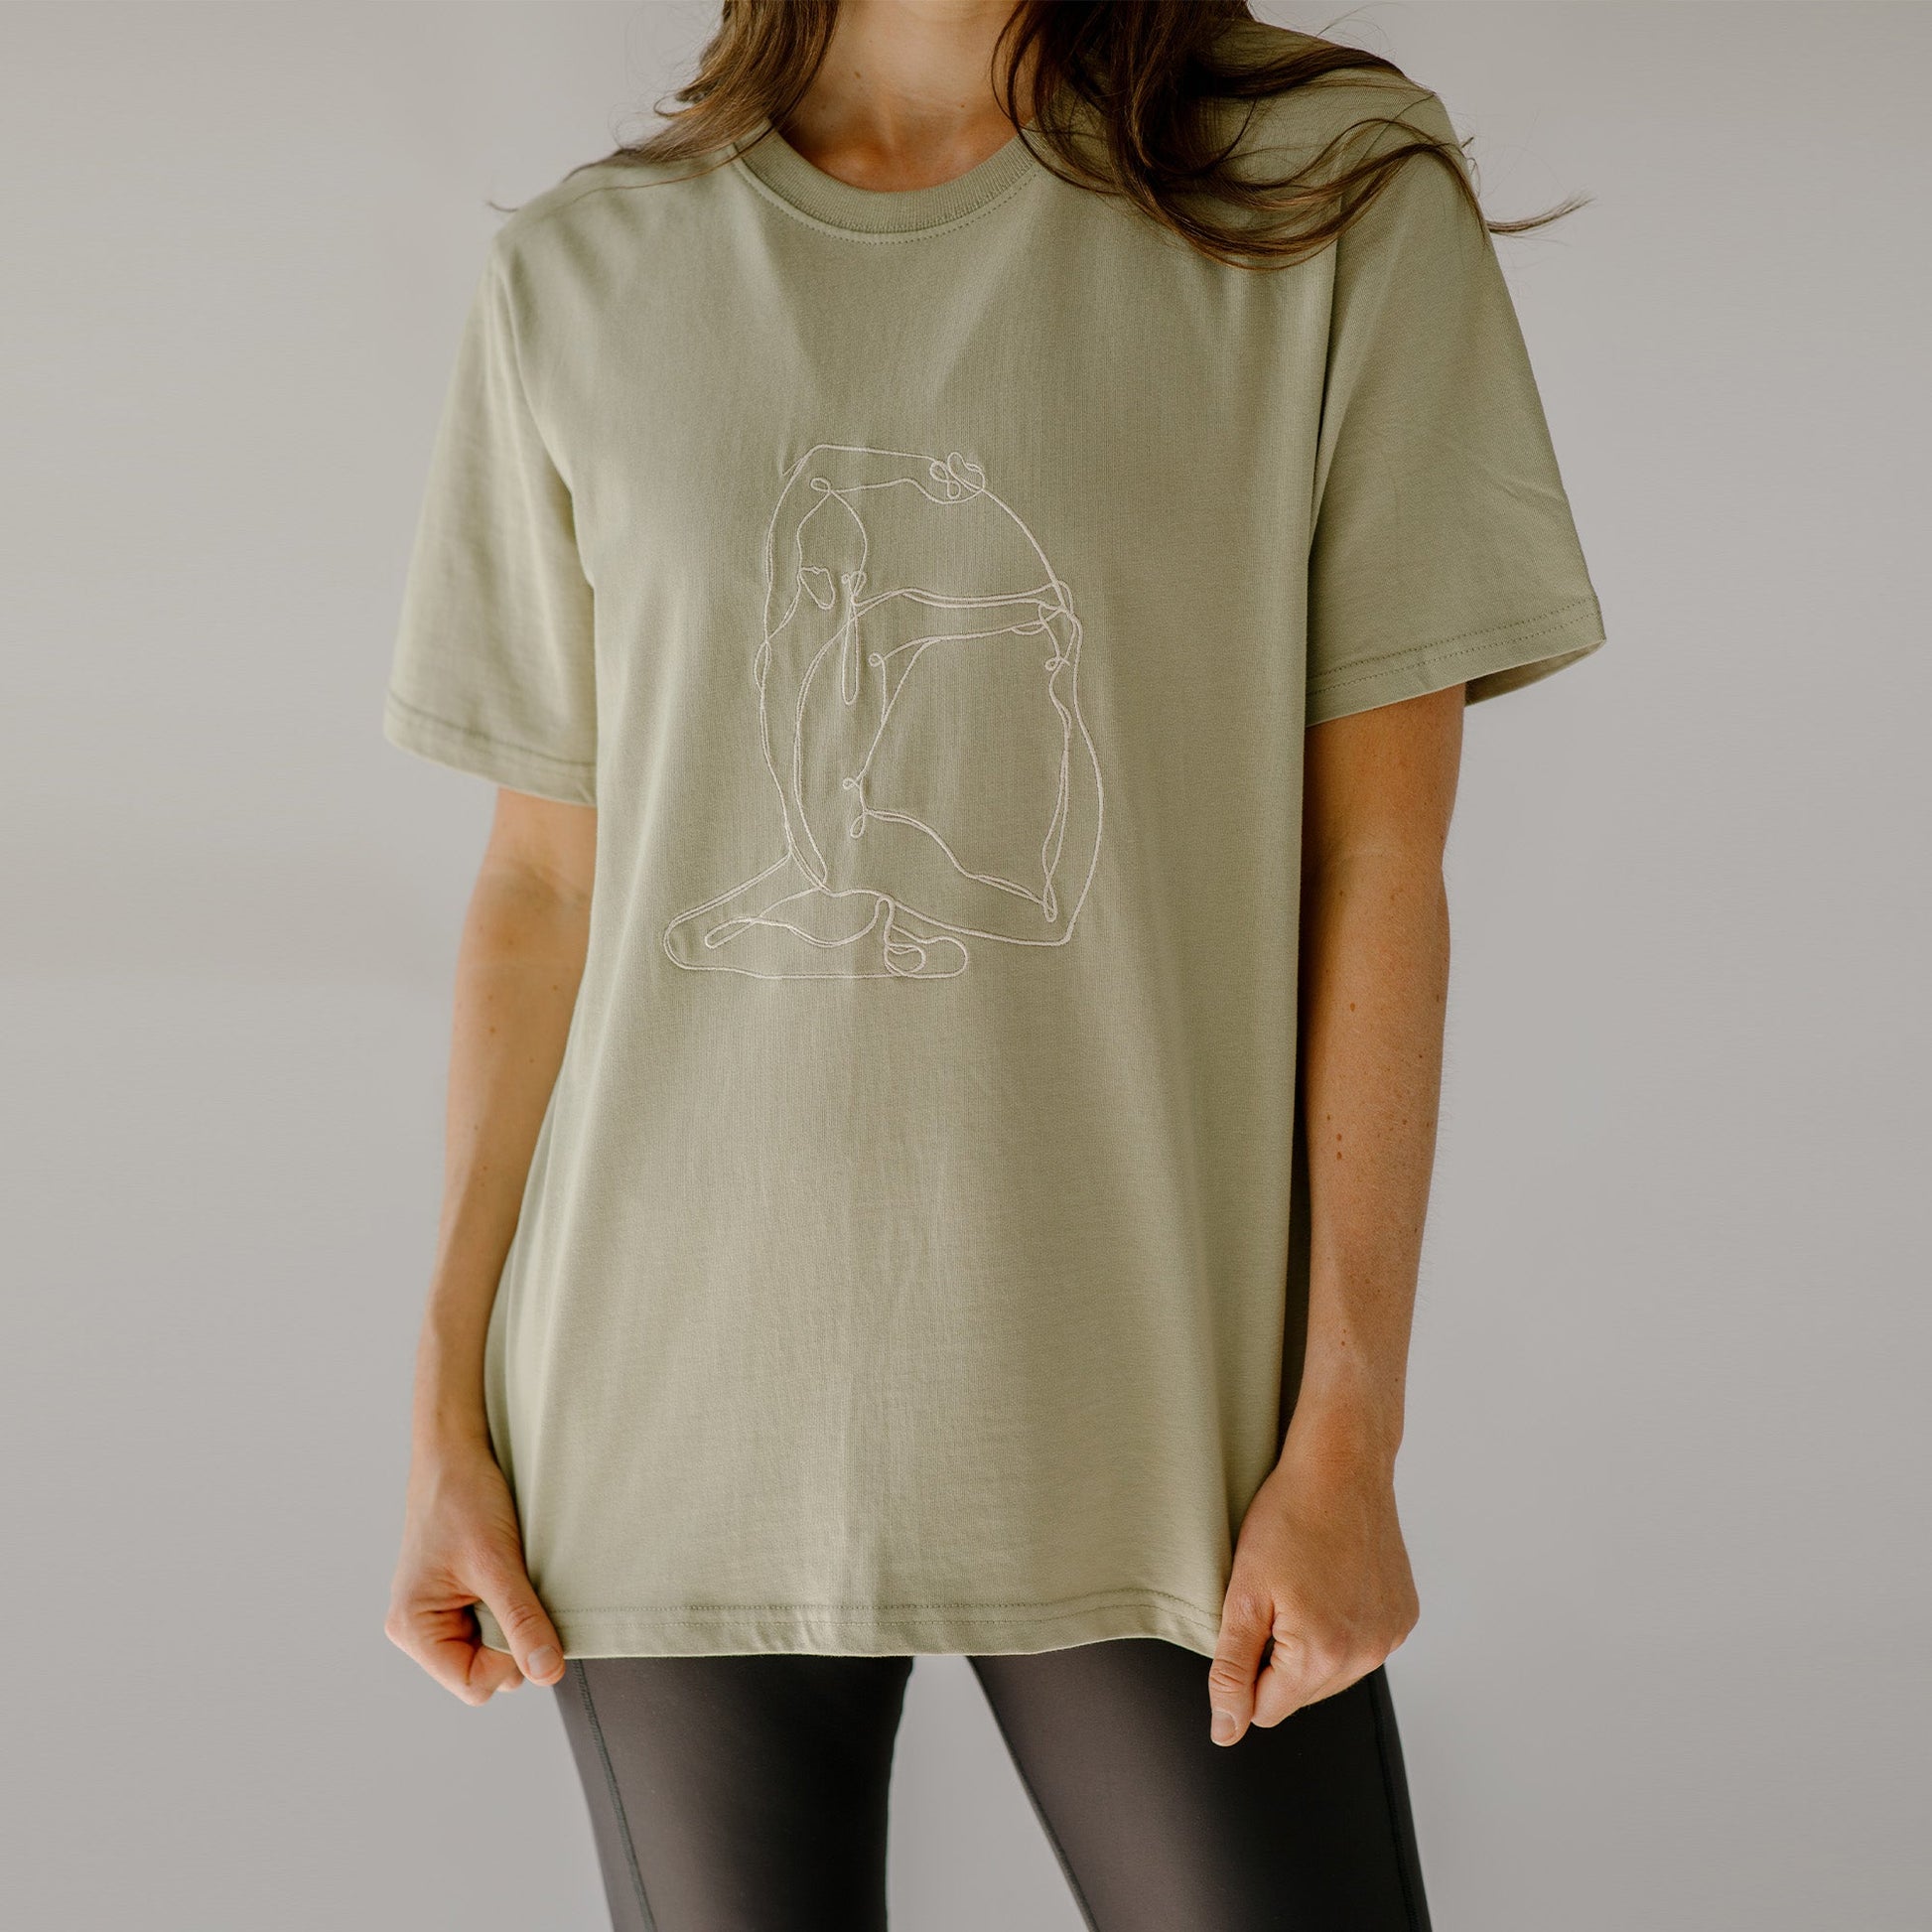 Mermaid Embroidered Sage Organic Cotton T-shirt - Actively Conscious